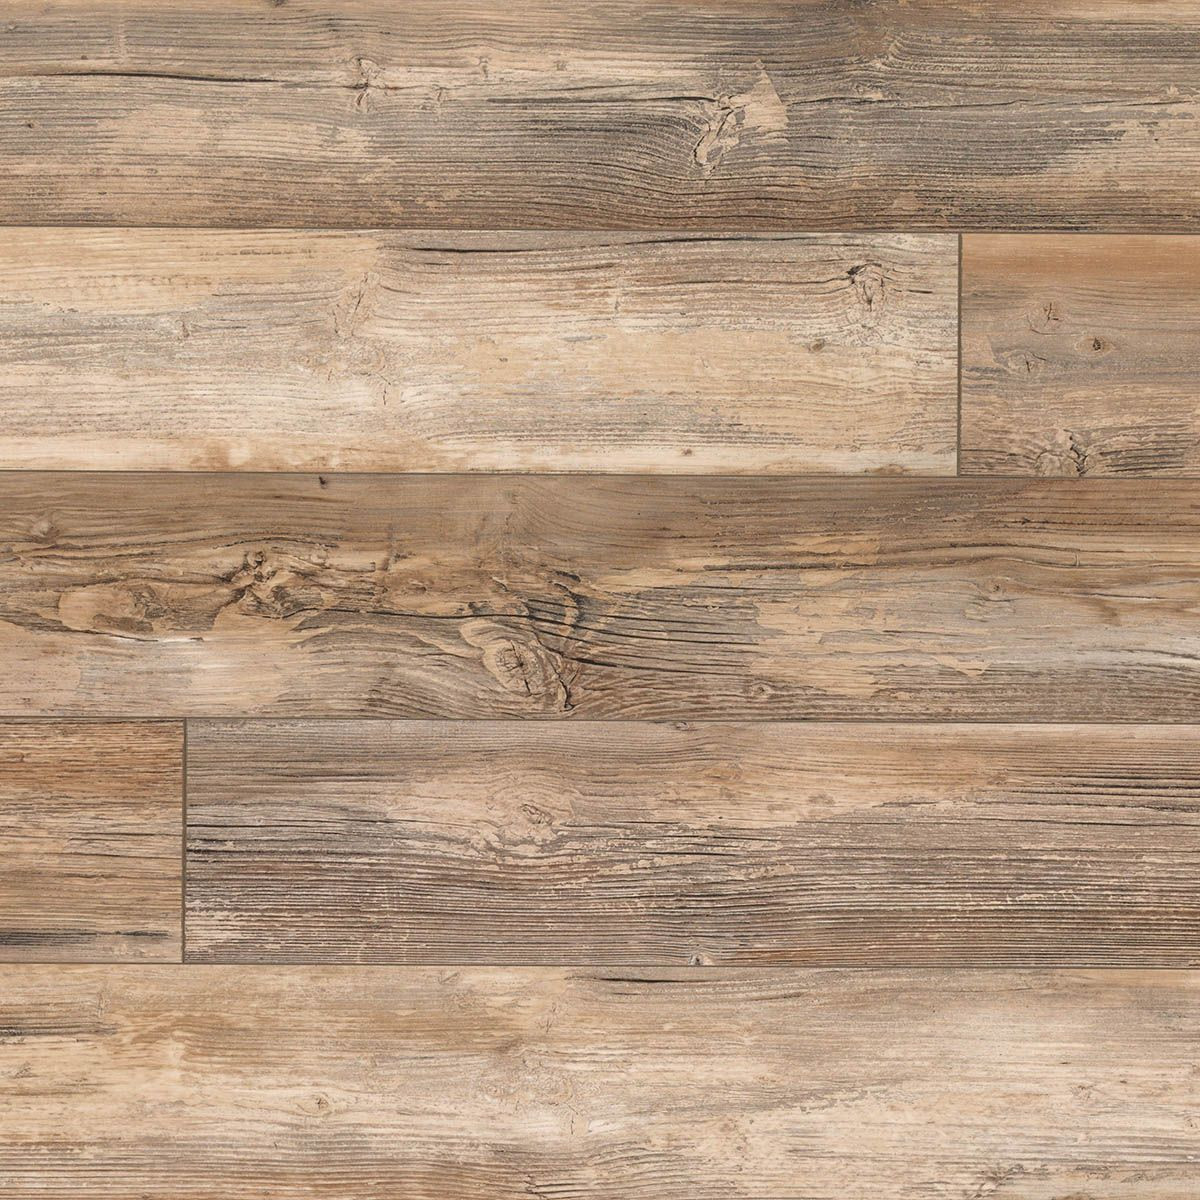 24 Nice Houzz Engineered Hardwood Floors 2024 free download houzz engineered hardwood floors of flooring gallery mozzone lumber with regard to a warm toffee brown with gray accents just like these planks theyre perfect for elegant comfortable looks g